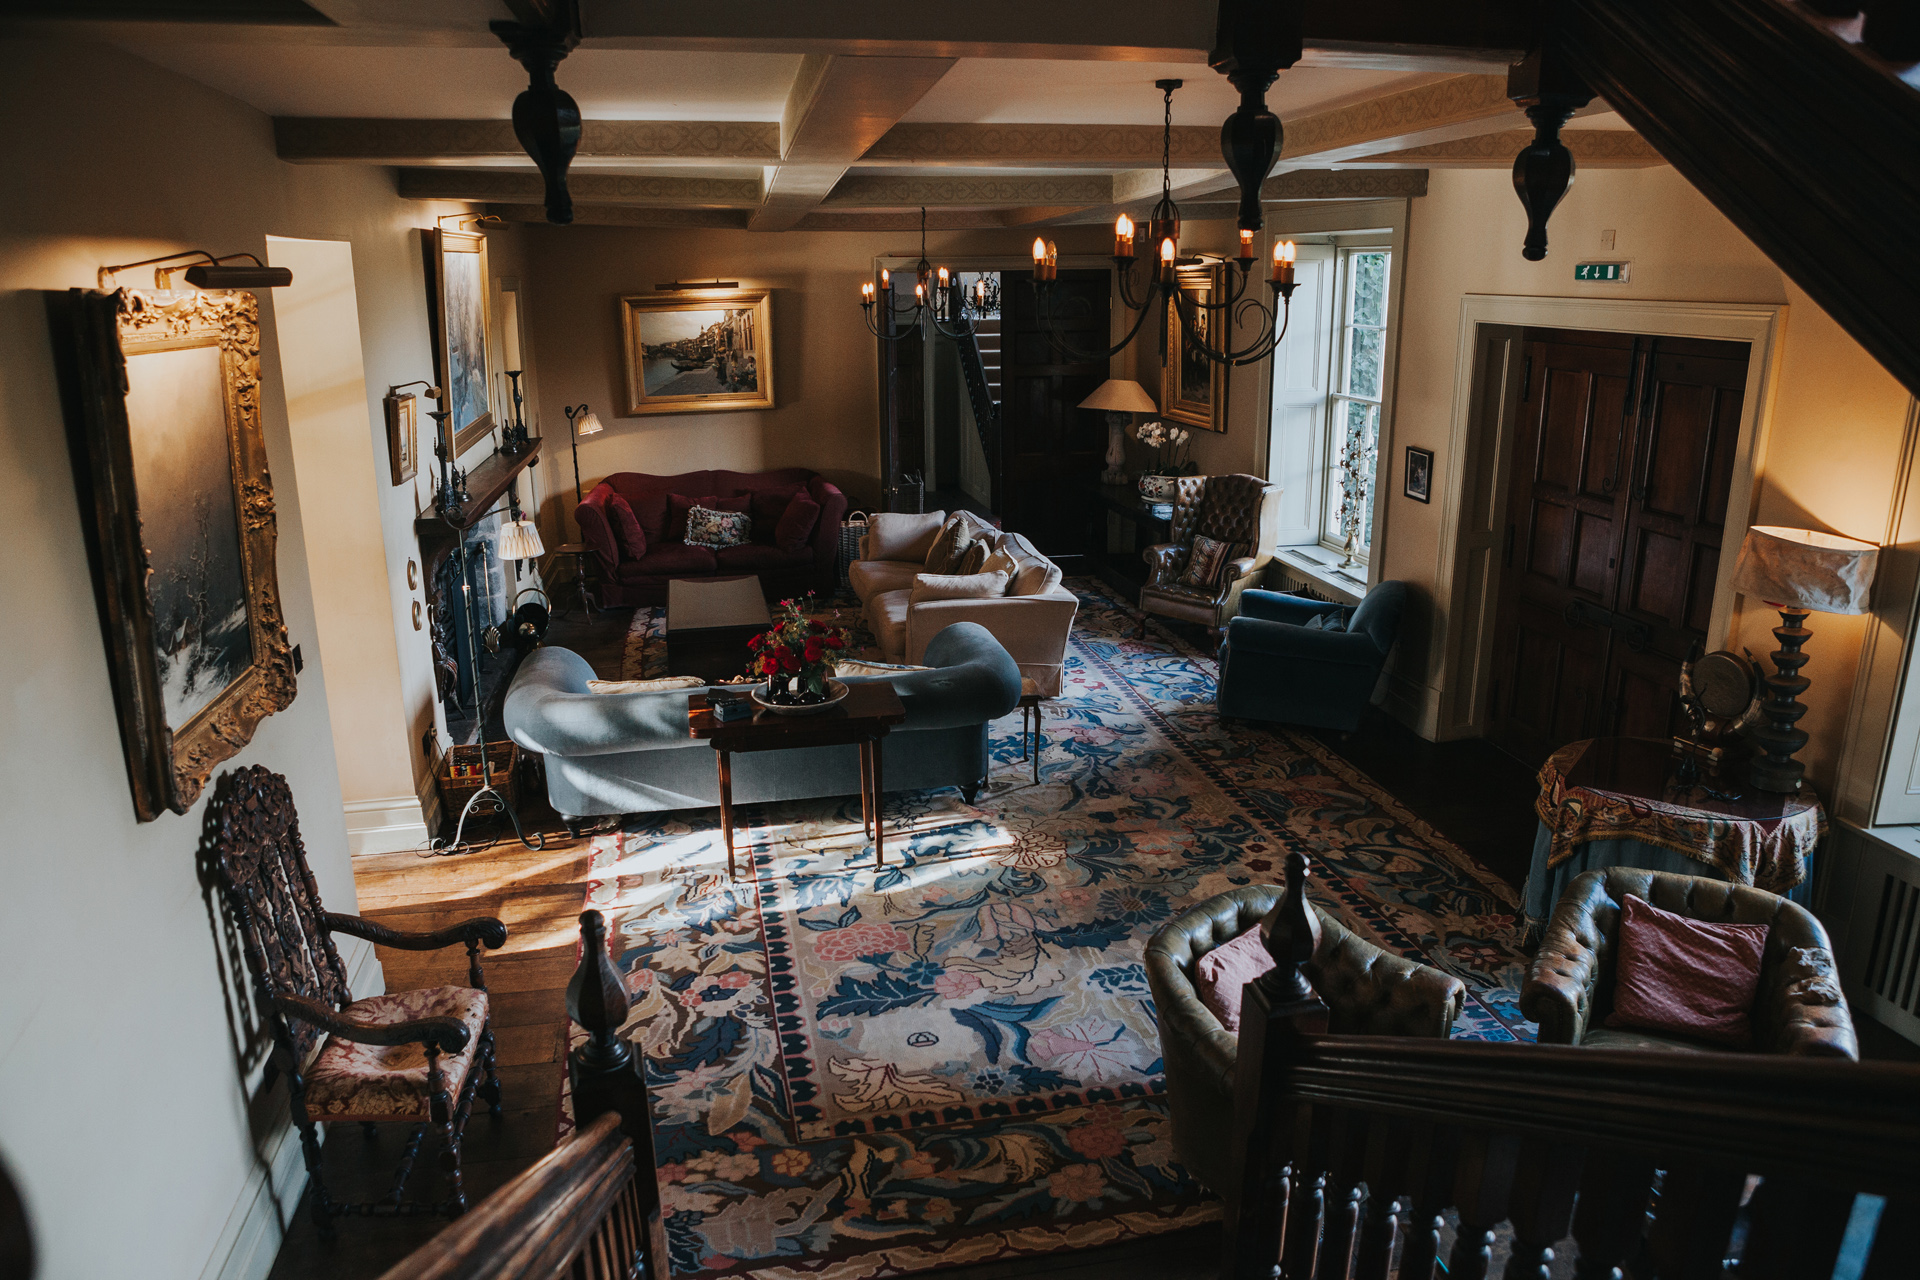 The living area at Dewsall Court